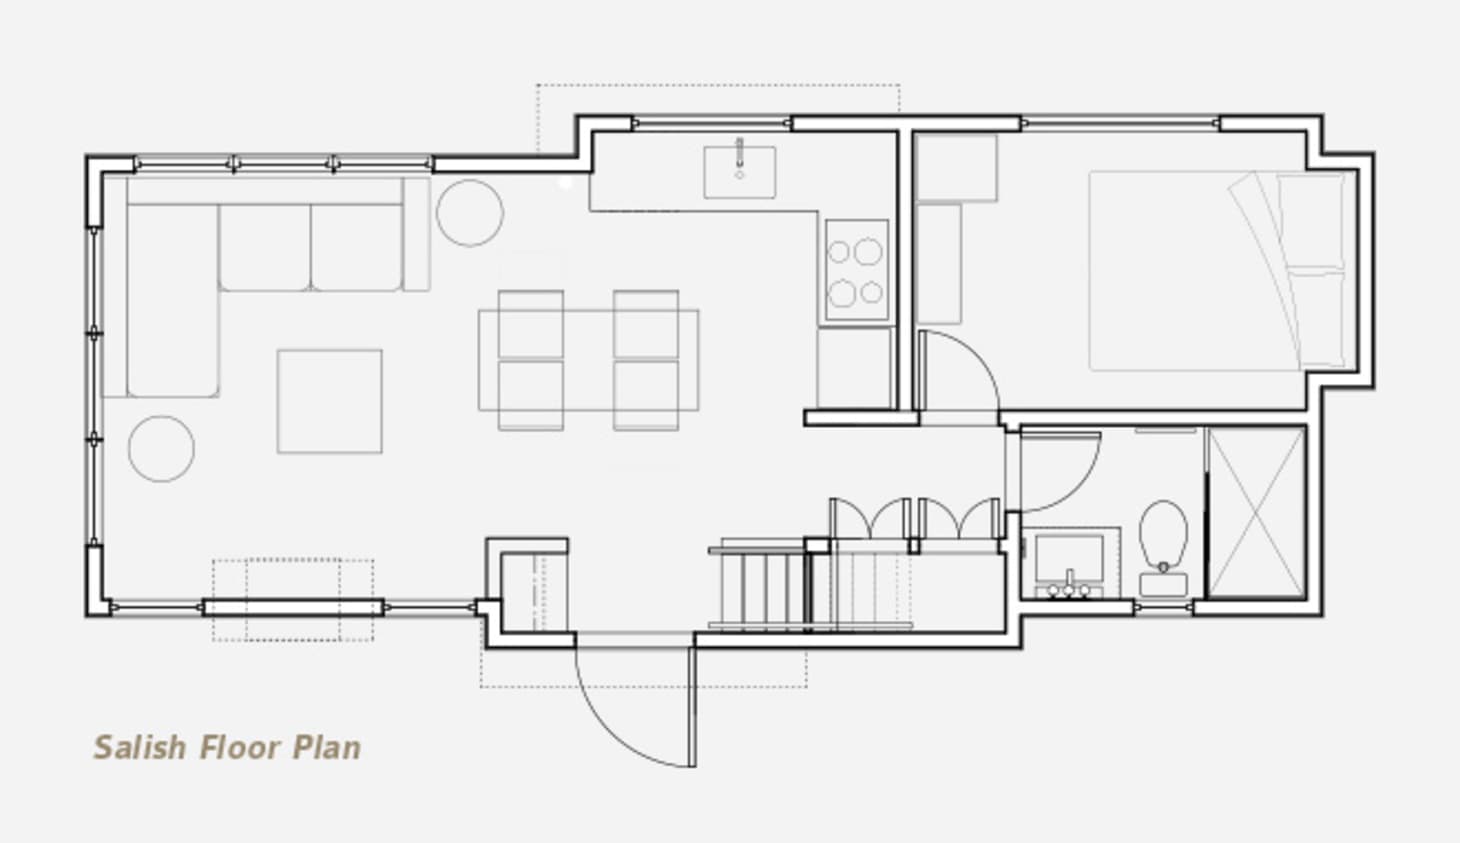 Full One Bedroom Tiny House Layout 400 Square Feet